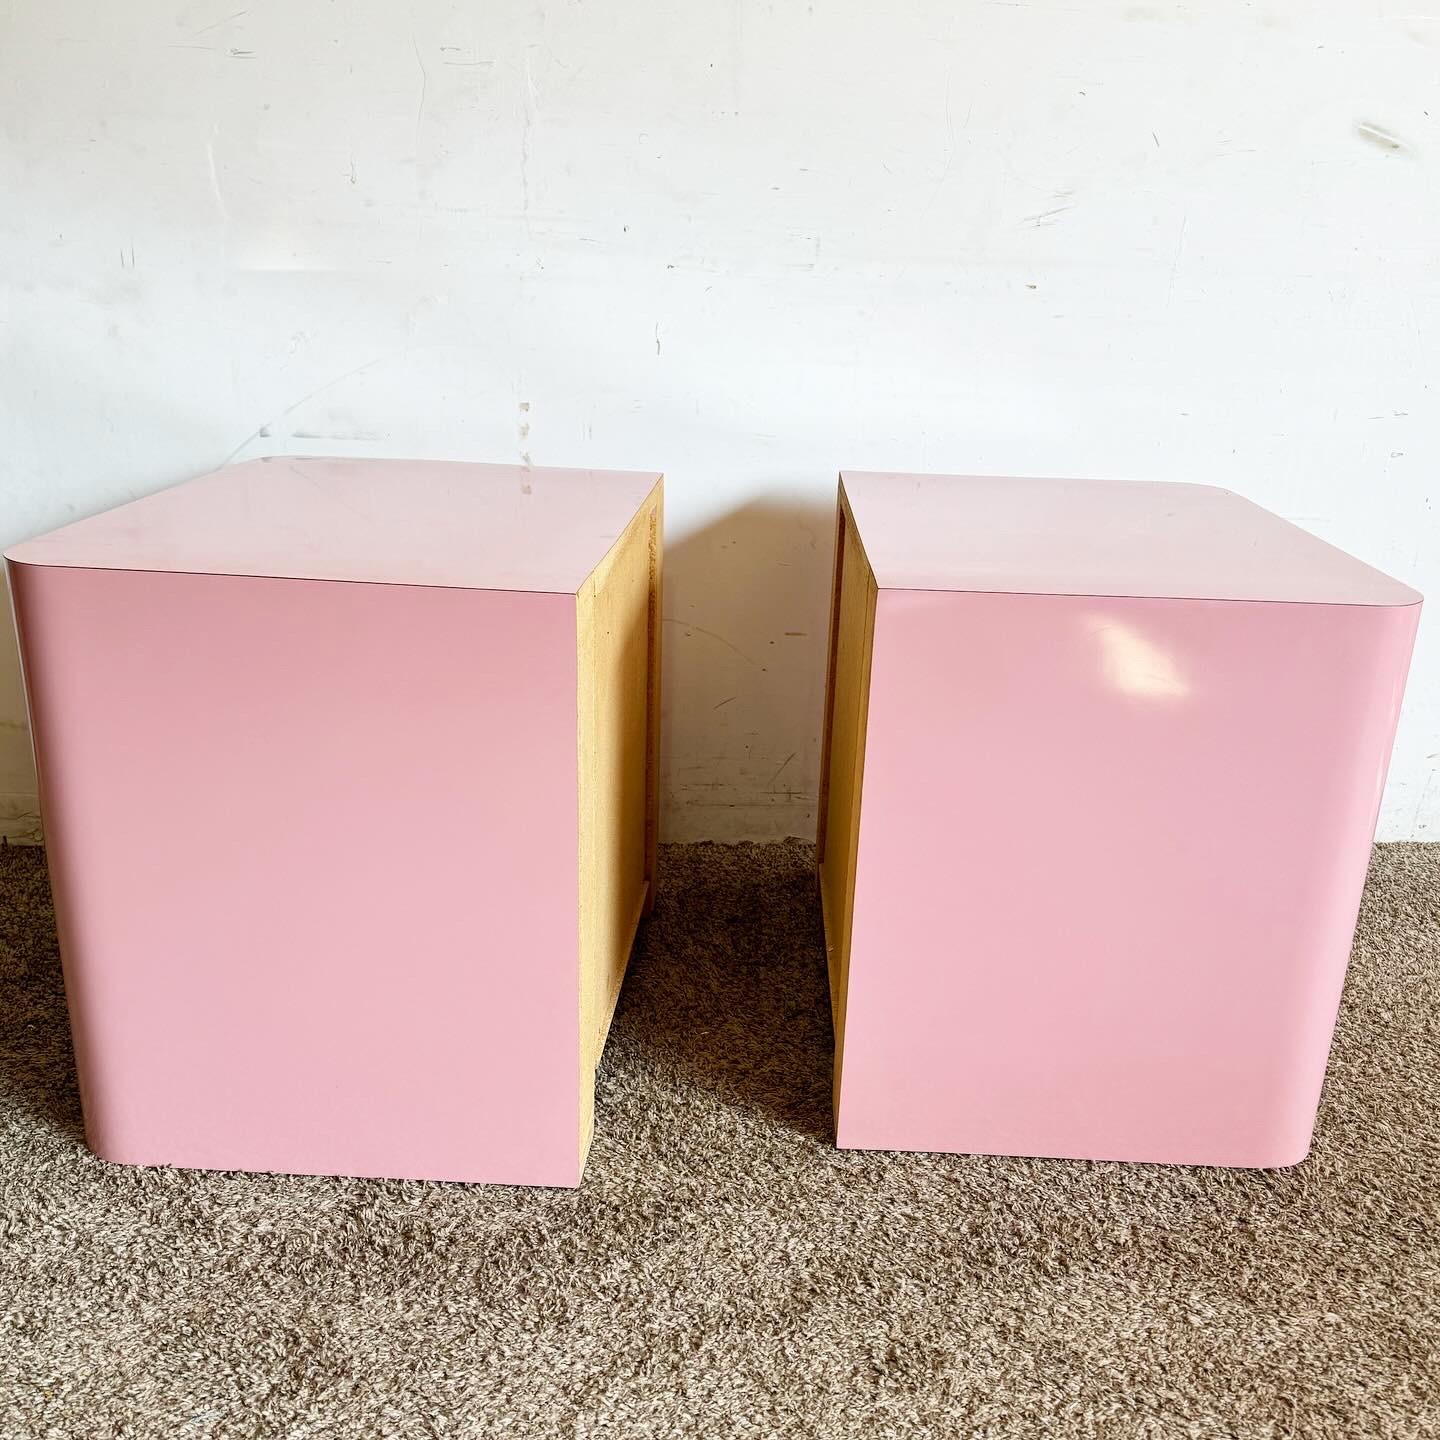 Add a splash of modernity to your bedroom with these Postmodern Pink Lacquer Laminate Nightstands with Chrome Handles. The bold pink hue and sleek chrome handles create a striking contrast, offering a playful yet sophisticated look. Equipped with